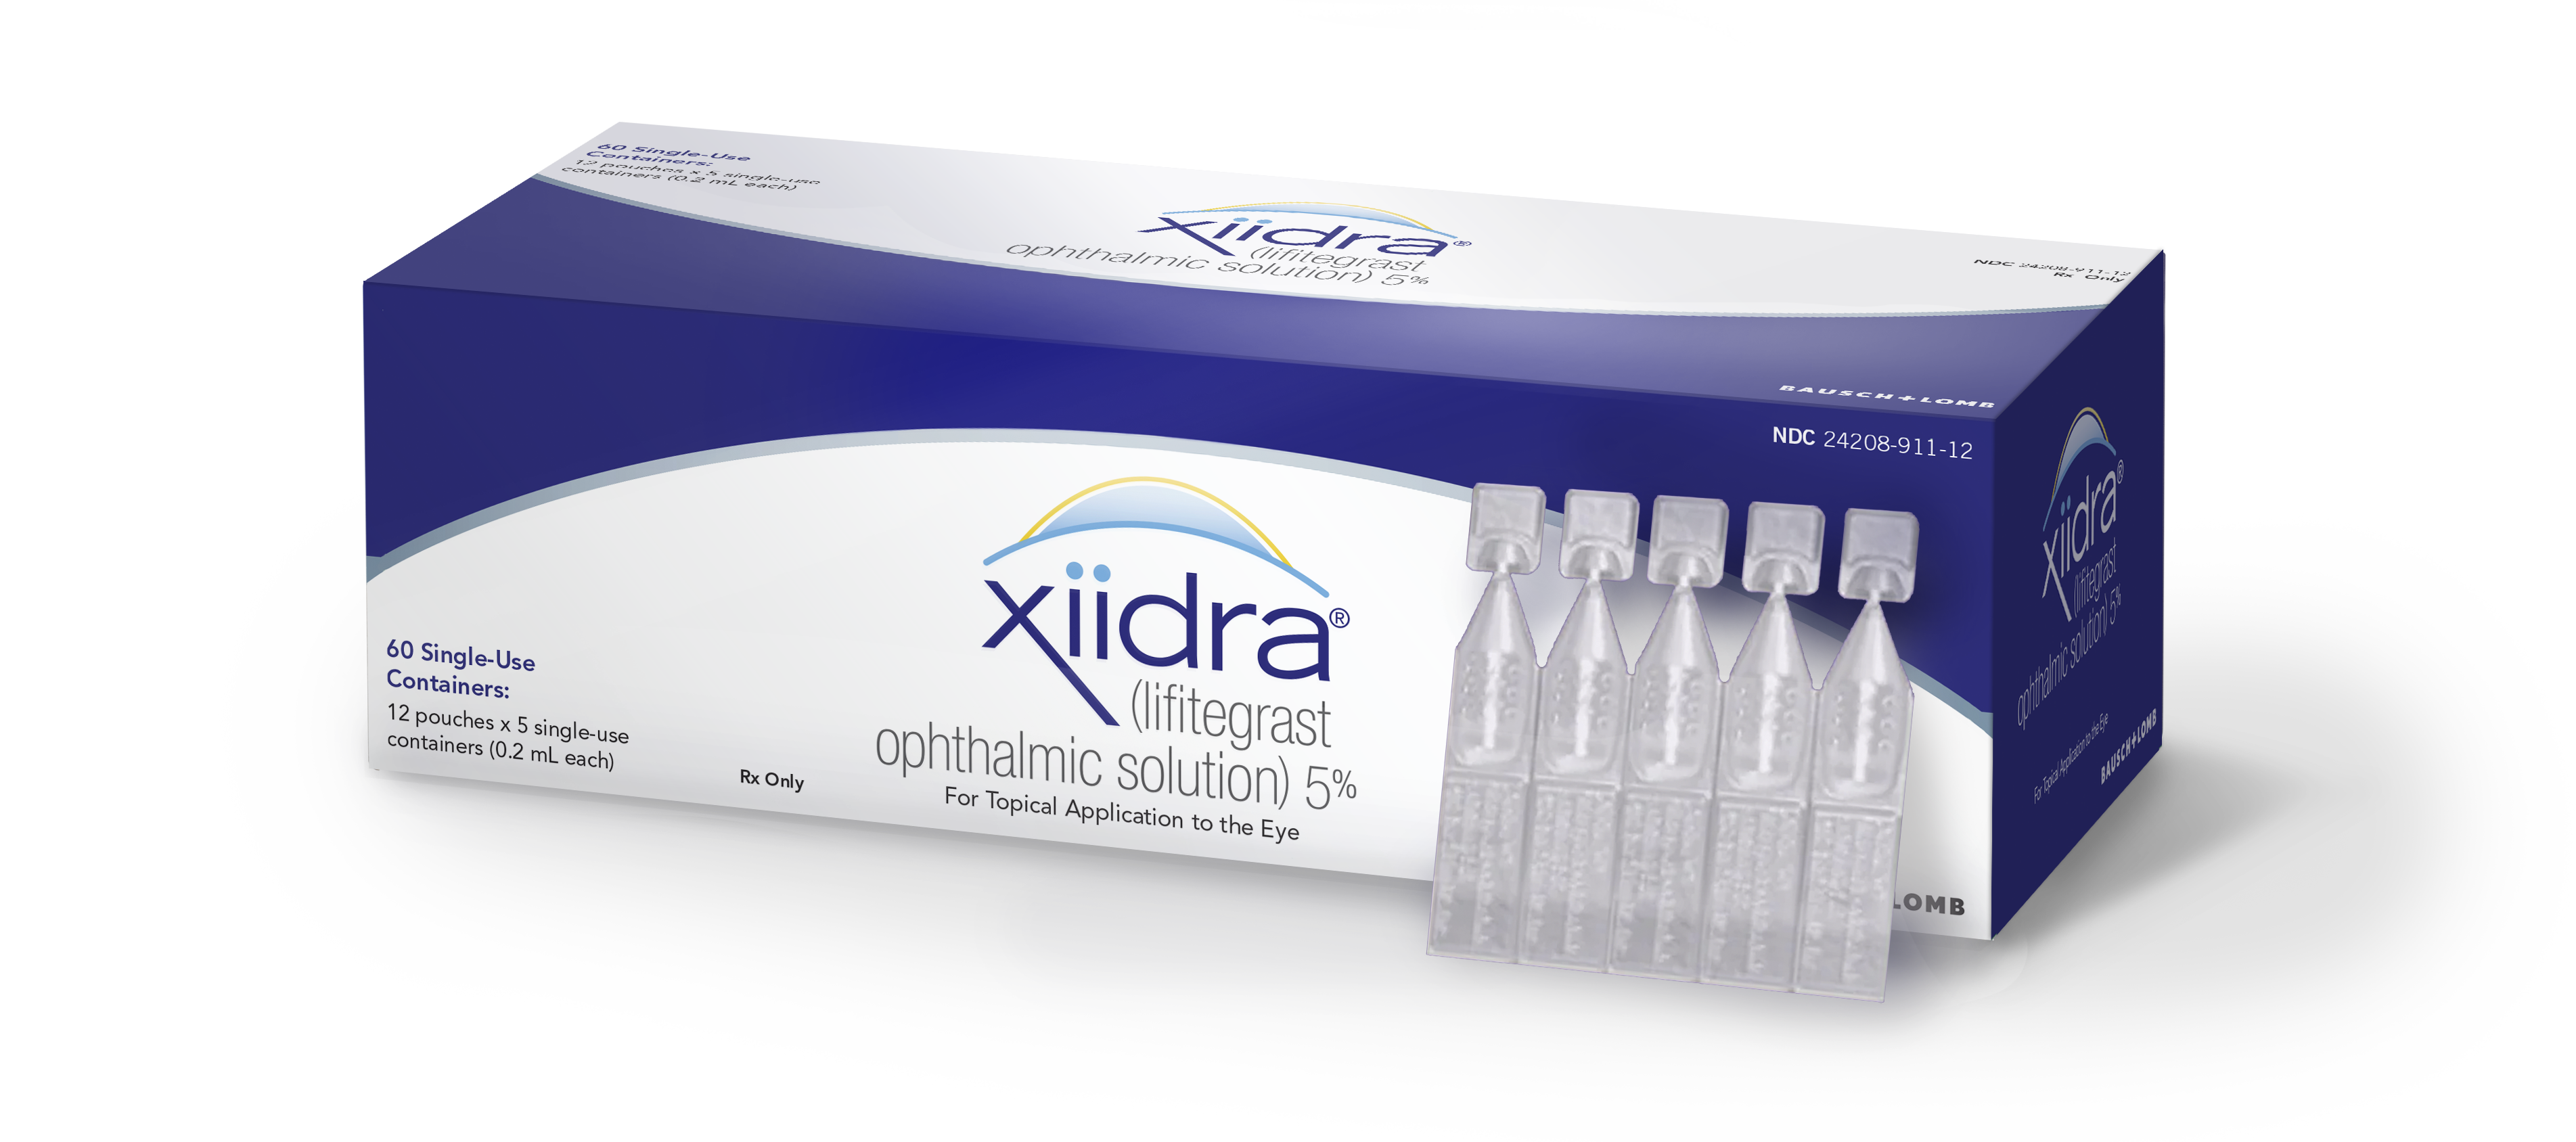 Xiidra® (lifitegrast ophthalmic solution) 5% package